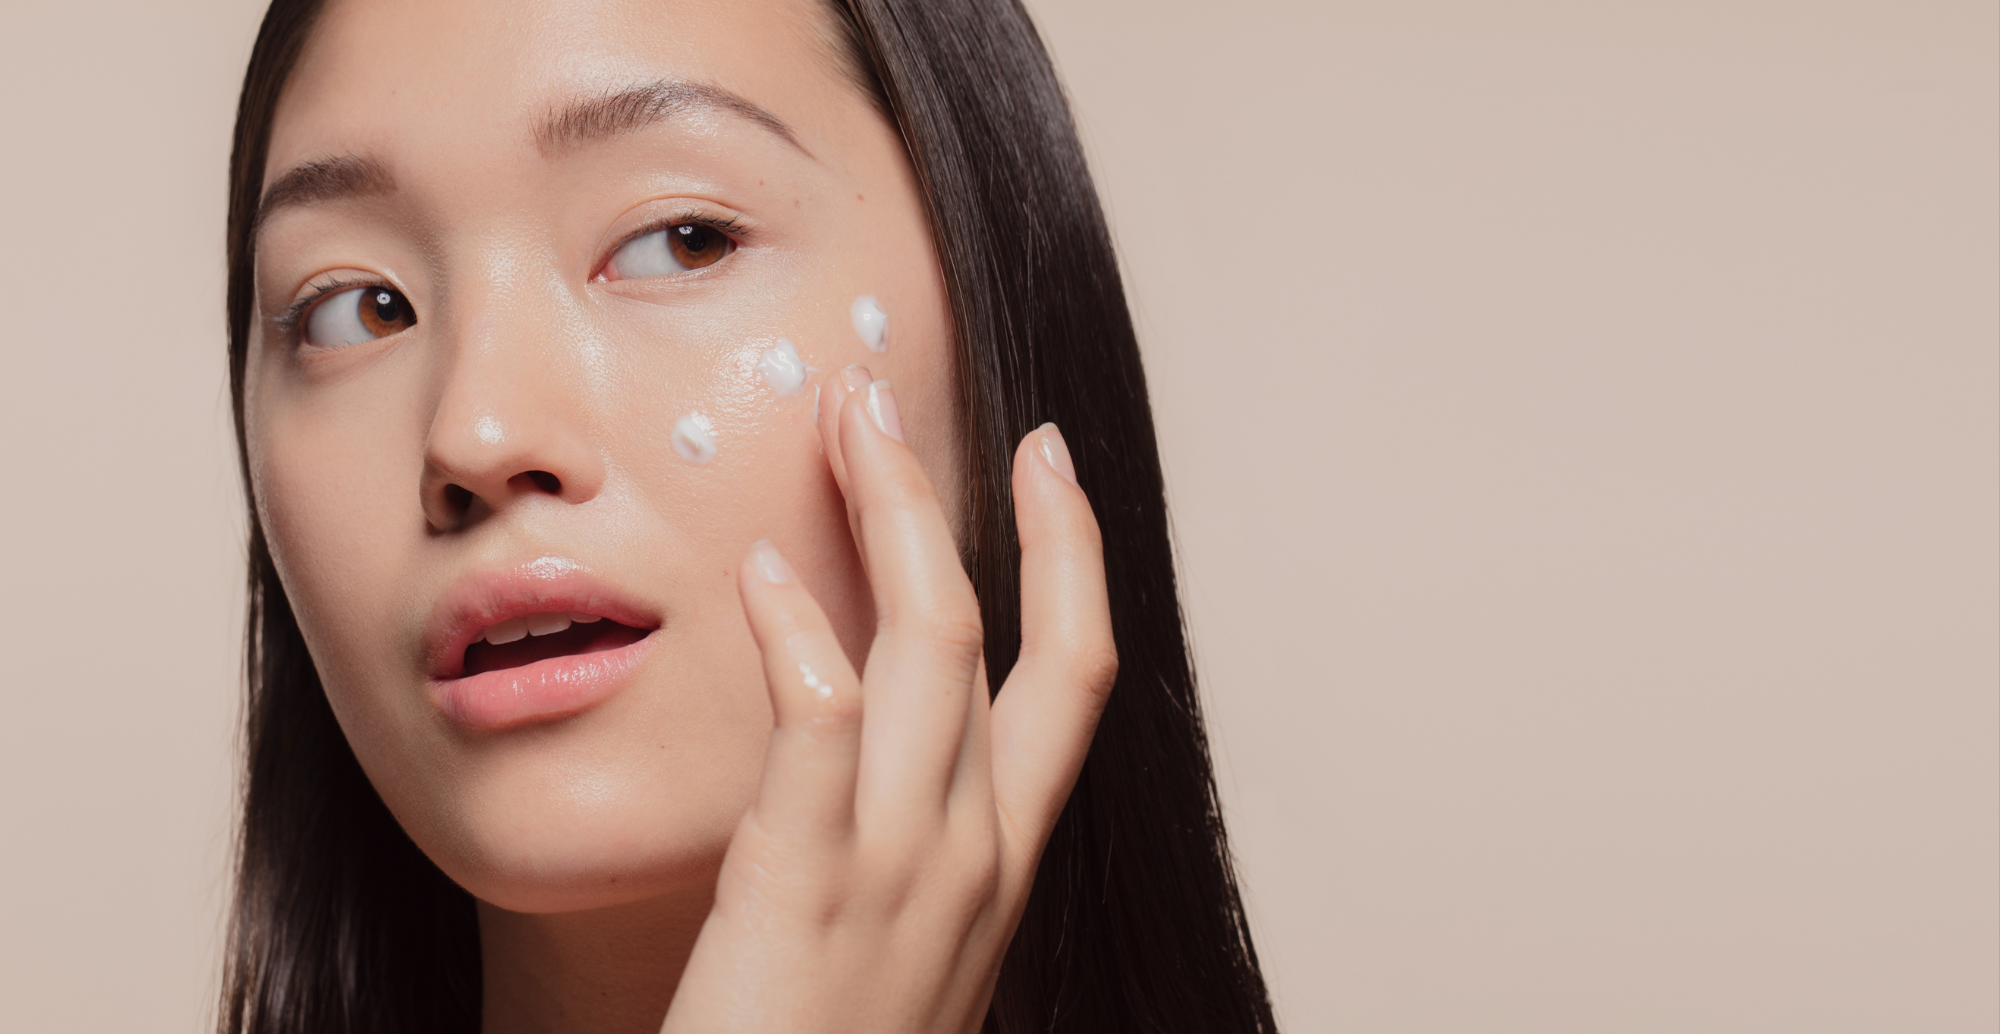 The easy way to add retinol into your skincare routine